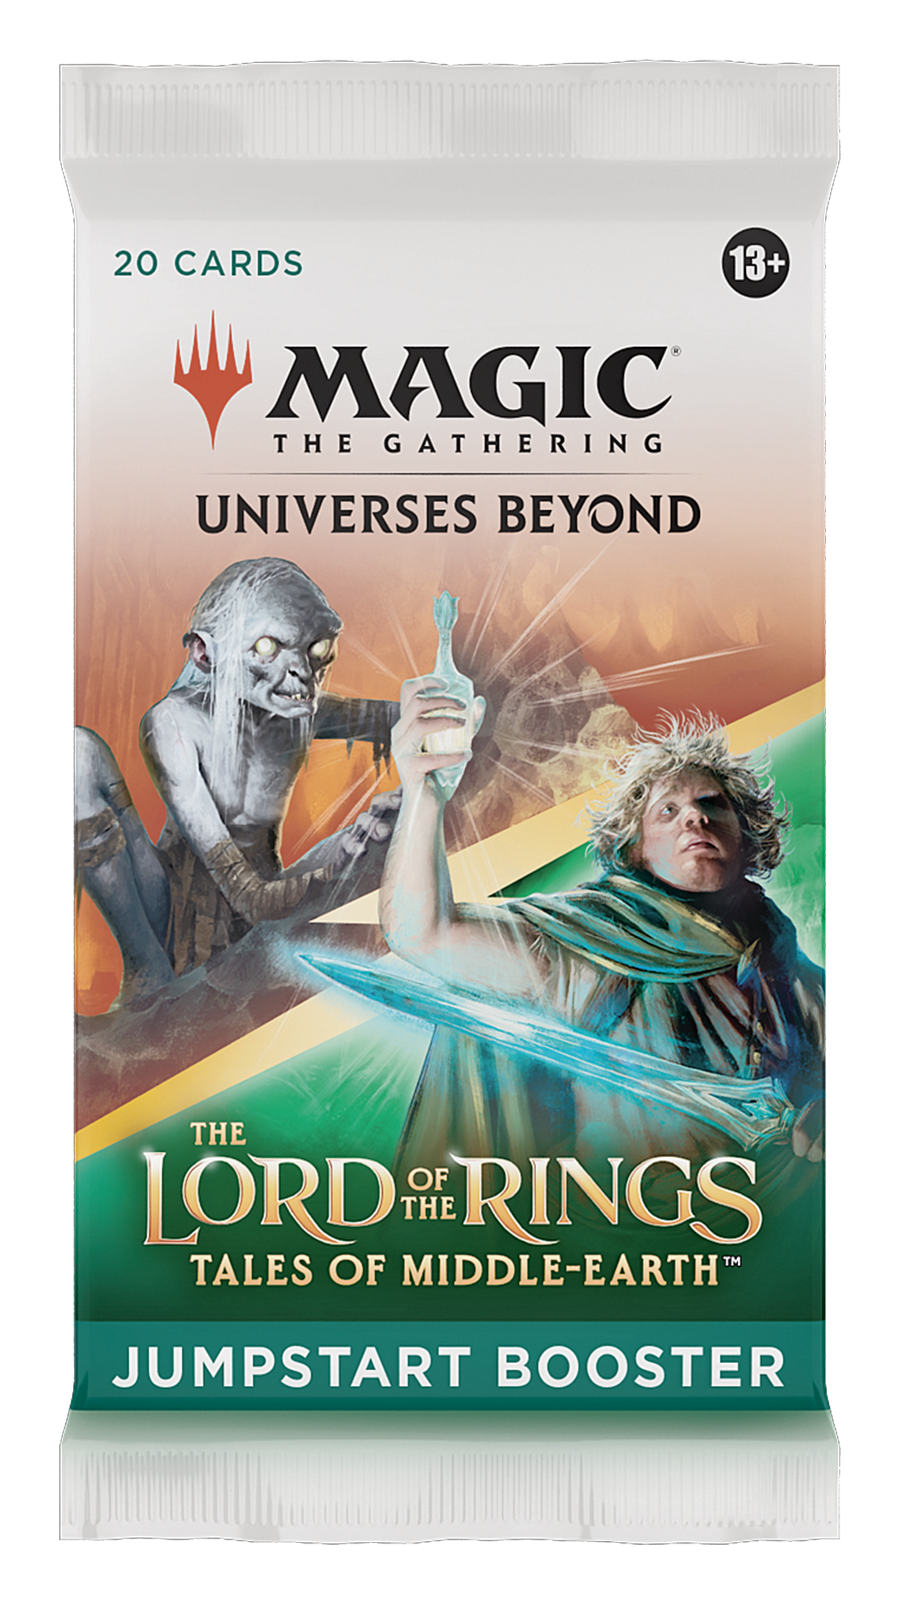 Magic the Gathering Lord of the Rings Set Booster Box - Guardian Games